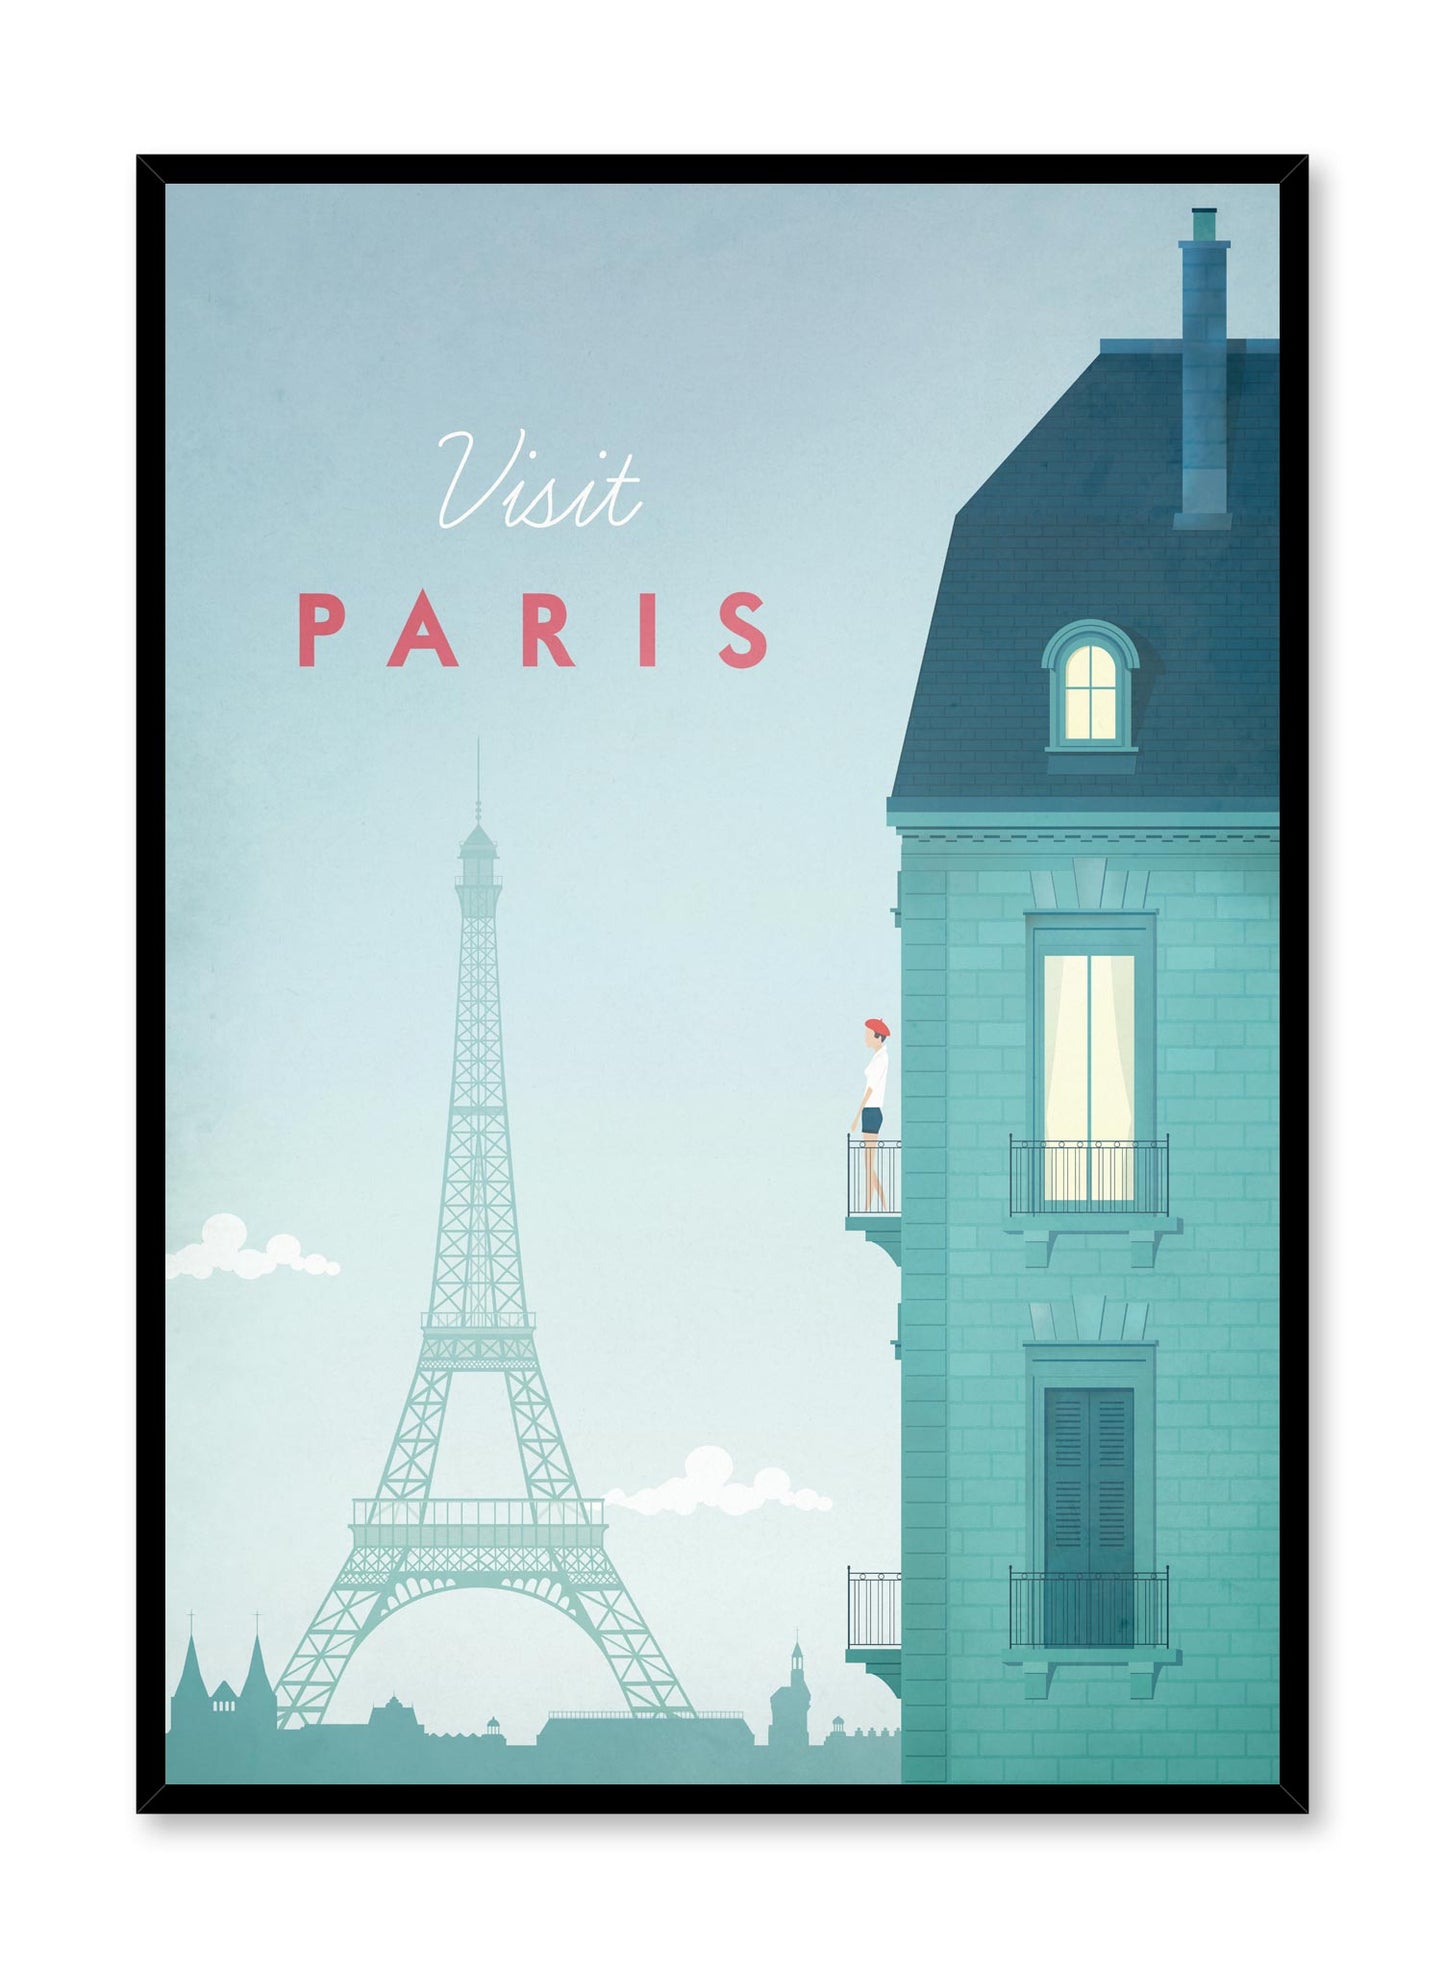 Modern minimalist poster by Opposite Wall with illustration of Paris travel poster